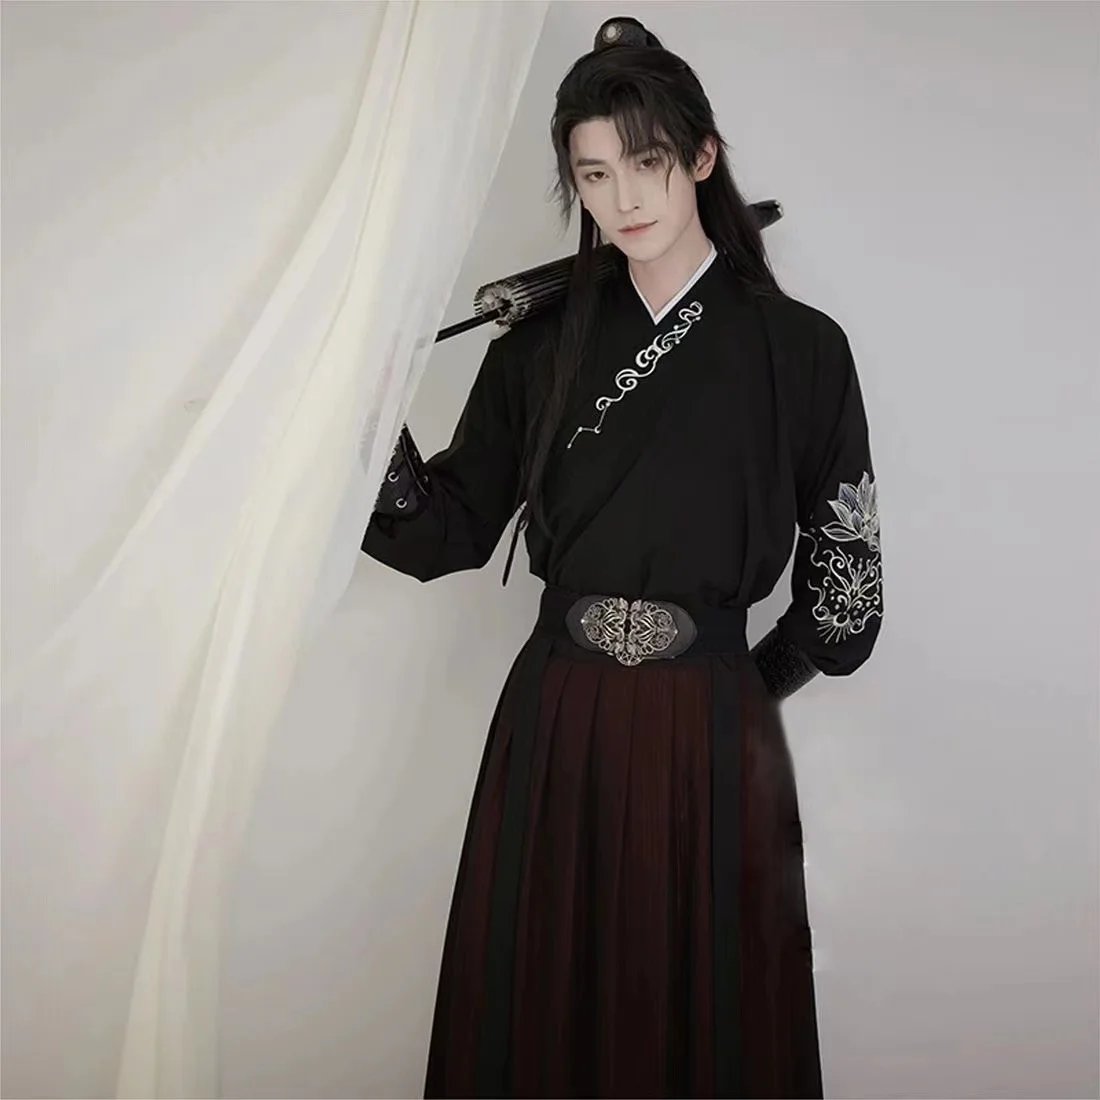 Chinese Style Hanfu Men Ancient Black Costume Hanfu Dress for Boys Girls Young Men Women Photography Cosplay Party Show Clothing sexy shine sexy lace dresses maternity photography props black grid gown pregnant women clothes pregnancy photo shoot